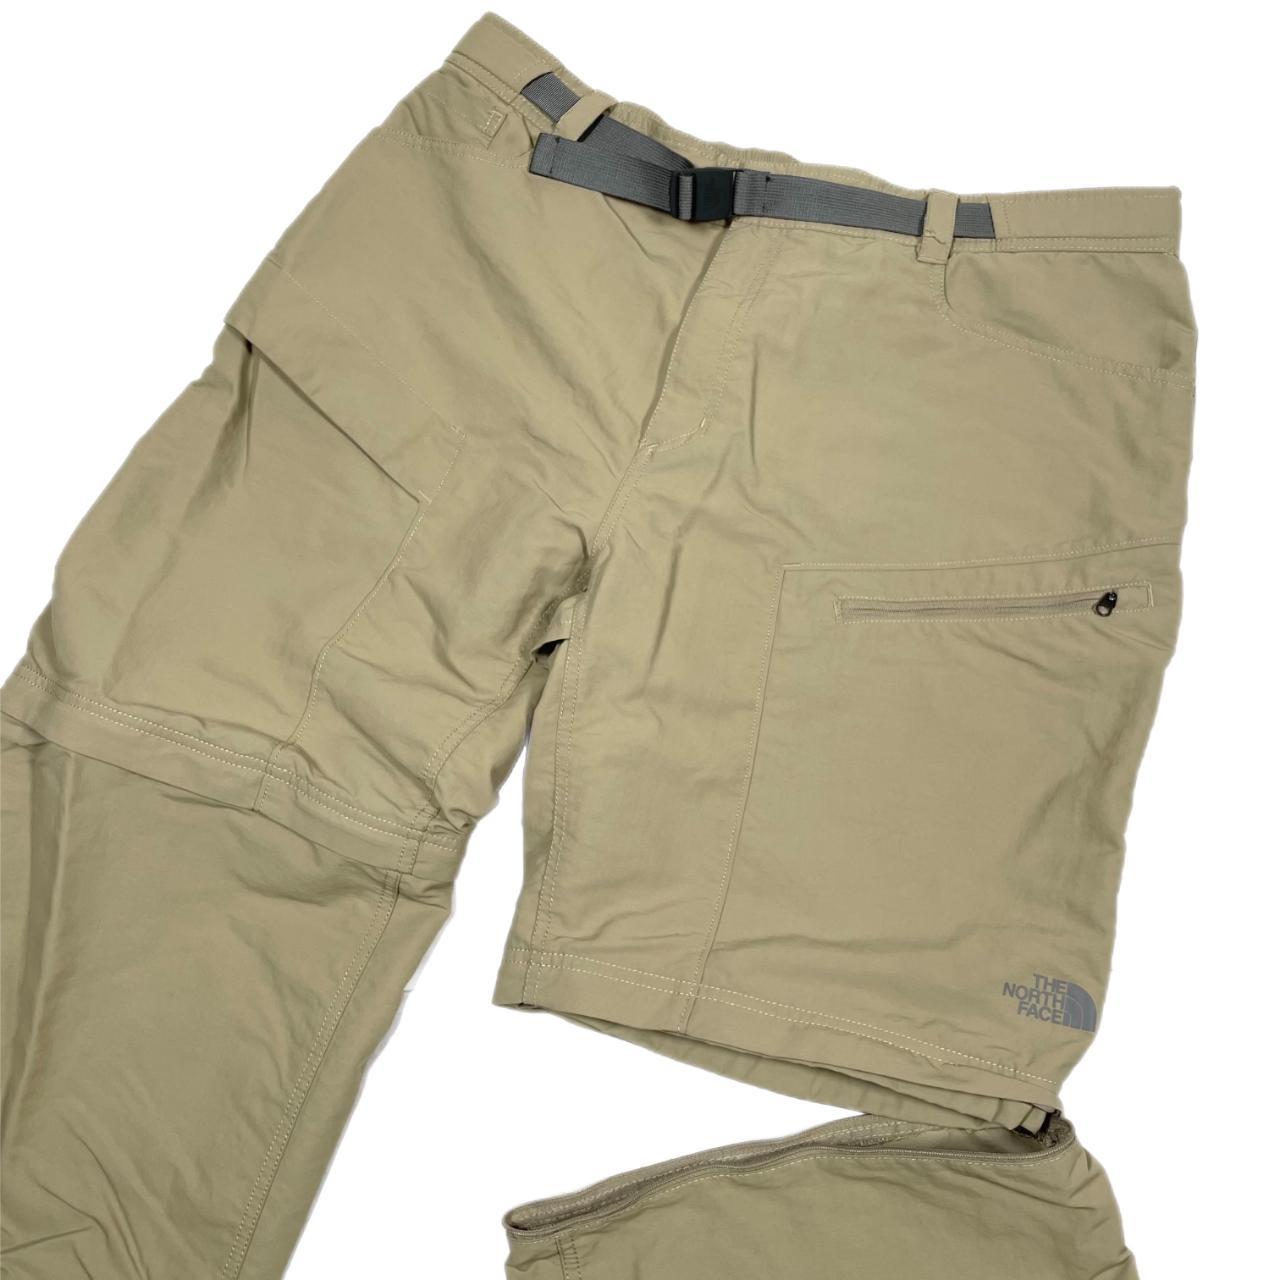 The North Face Men's Tan and Cream Trousers (3)